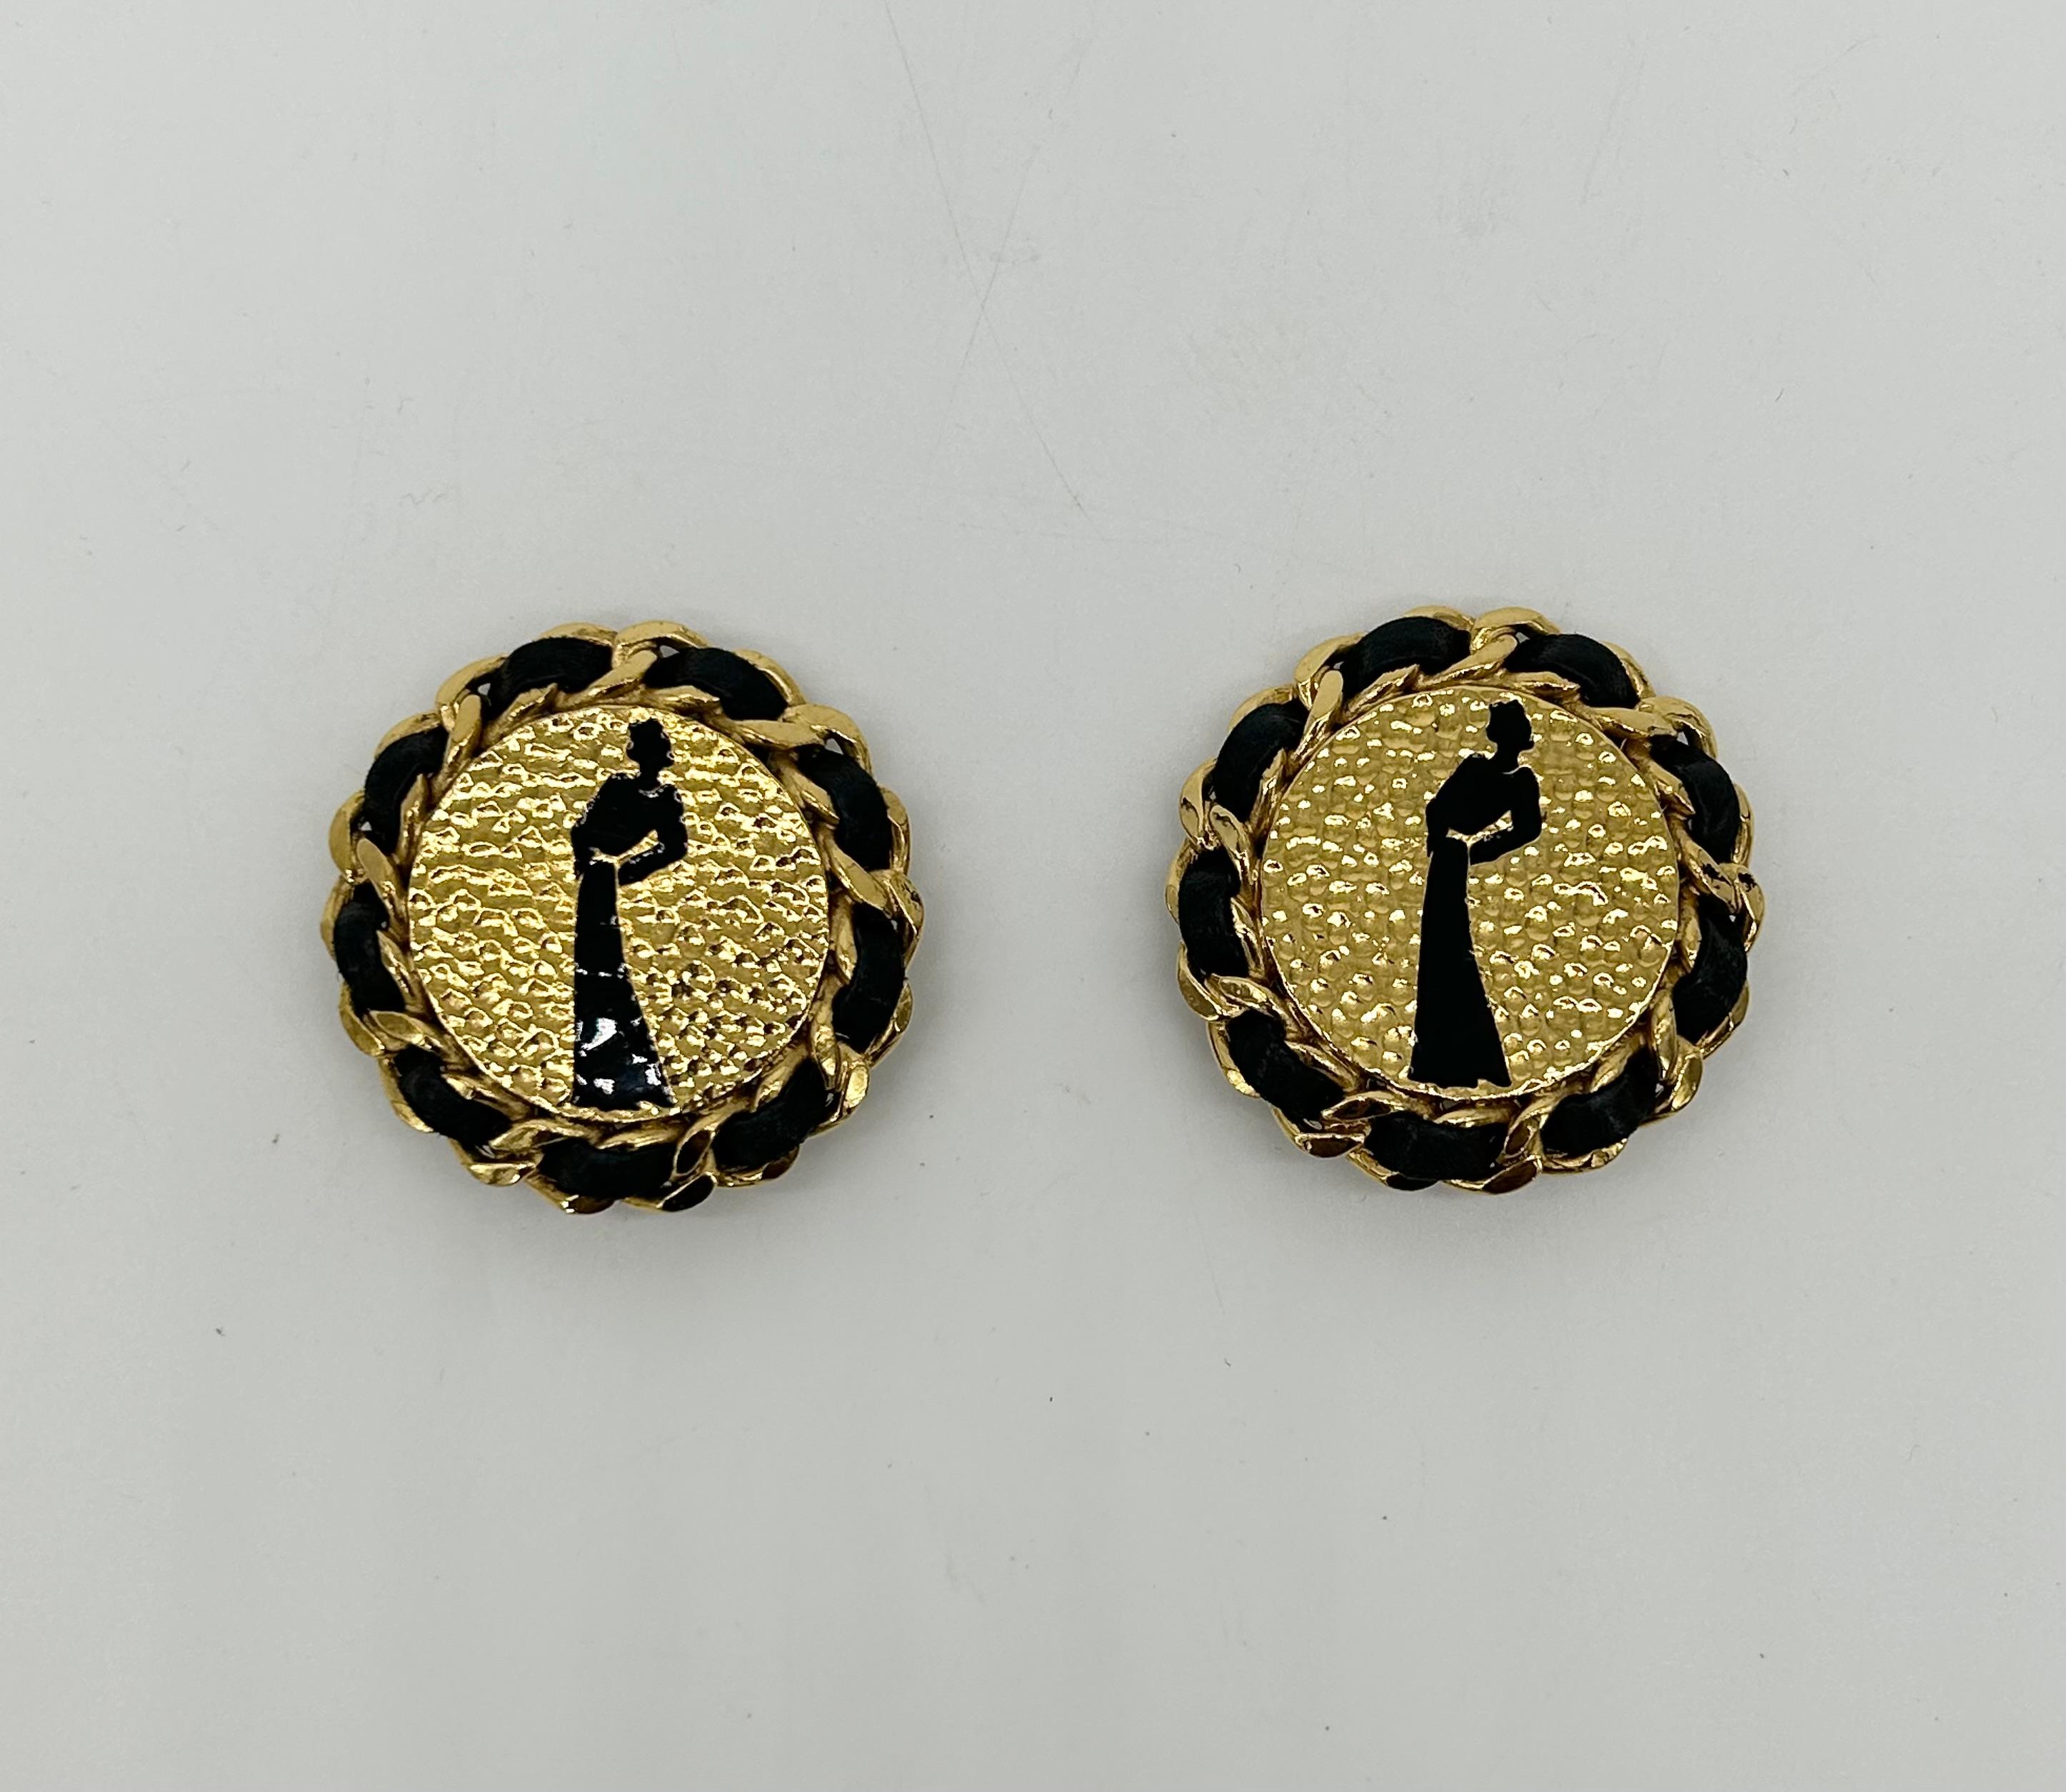 Chanel Vintage Gold Leather Chain Round Earrings In excellent condition. Large round gold earrings with black leather and chain edges and solid black enamel figure of woman standing in center front. Clip on backings. Excellent condition no scuffs or